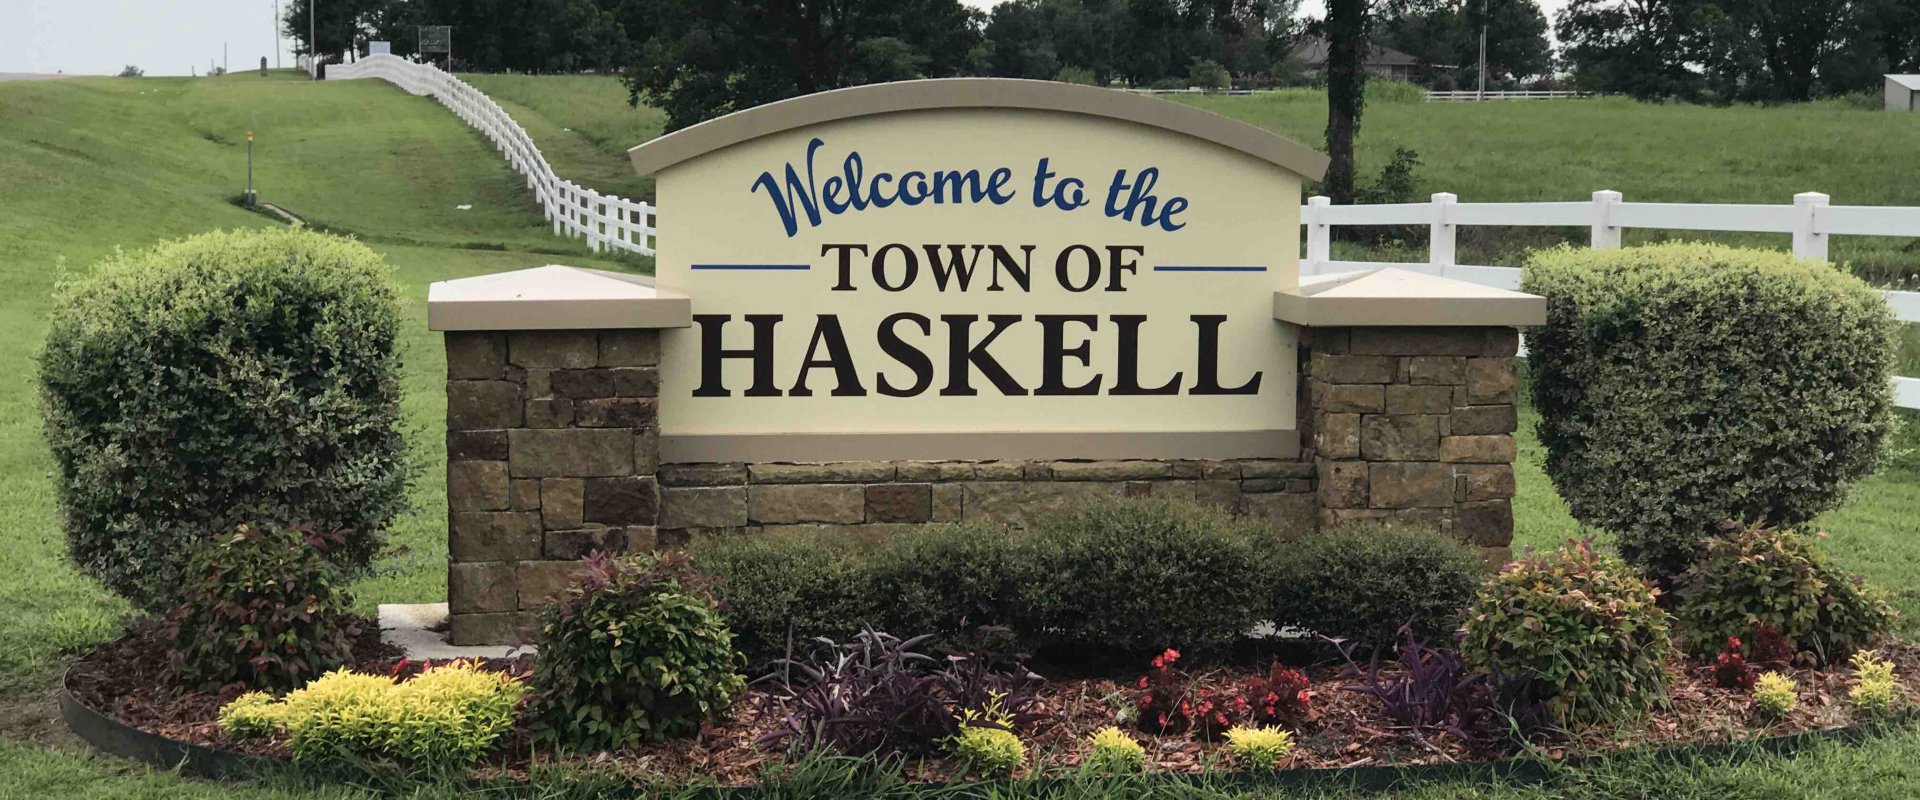 Sell Your House Fast Haskell. We Buy Homes Haskell. Contact us today at (918) 516-8885 and say “I Need to Sell My House Fast Haskell!